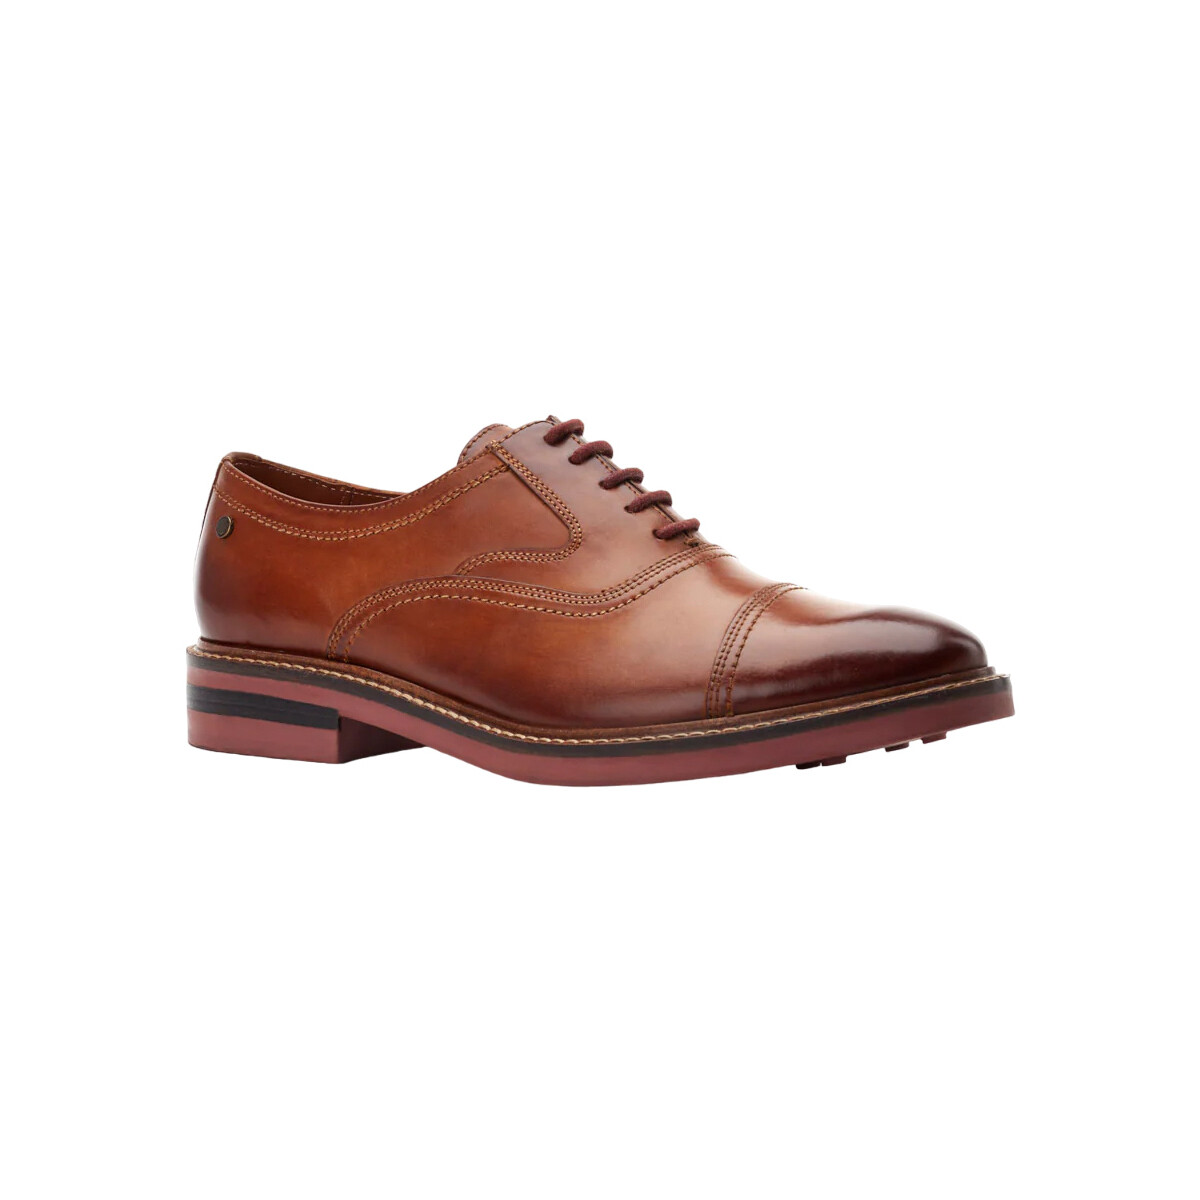 Chaussures Homme Derbies Base London Tatton Rouge